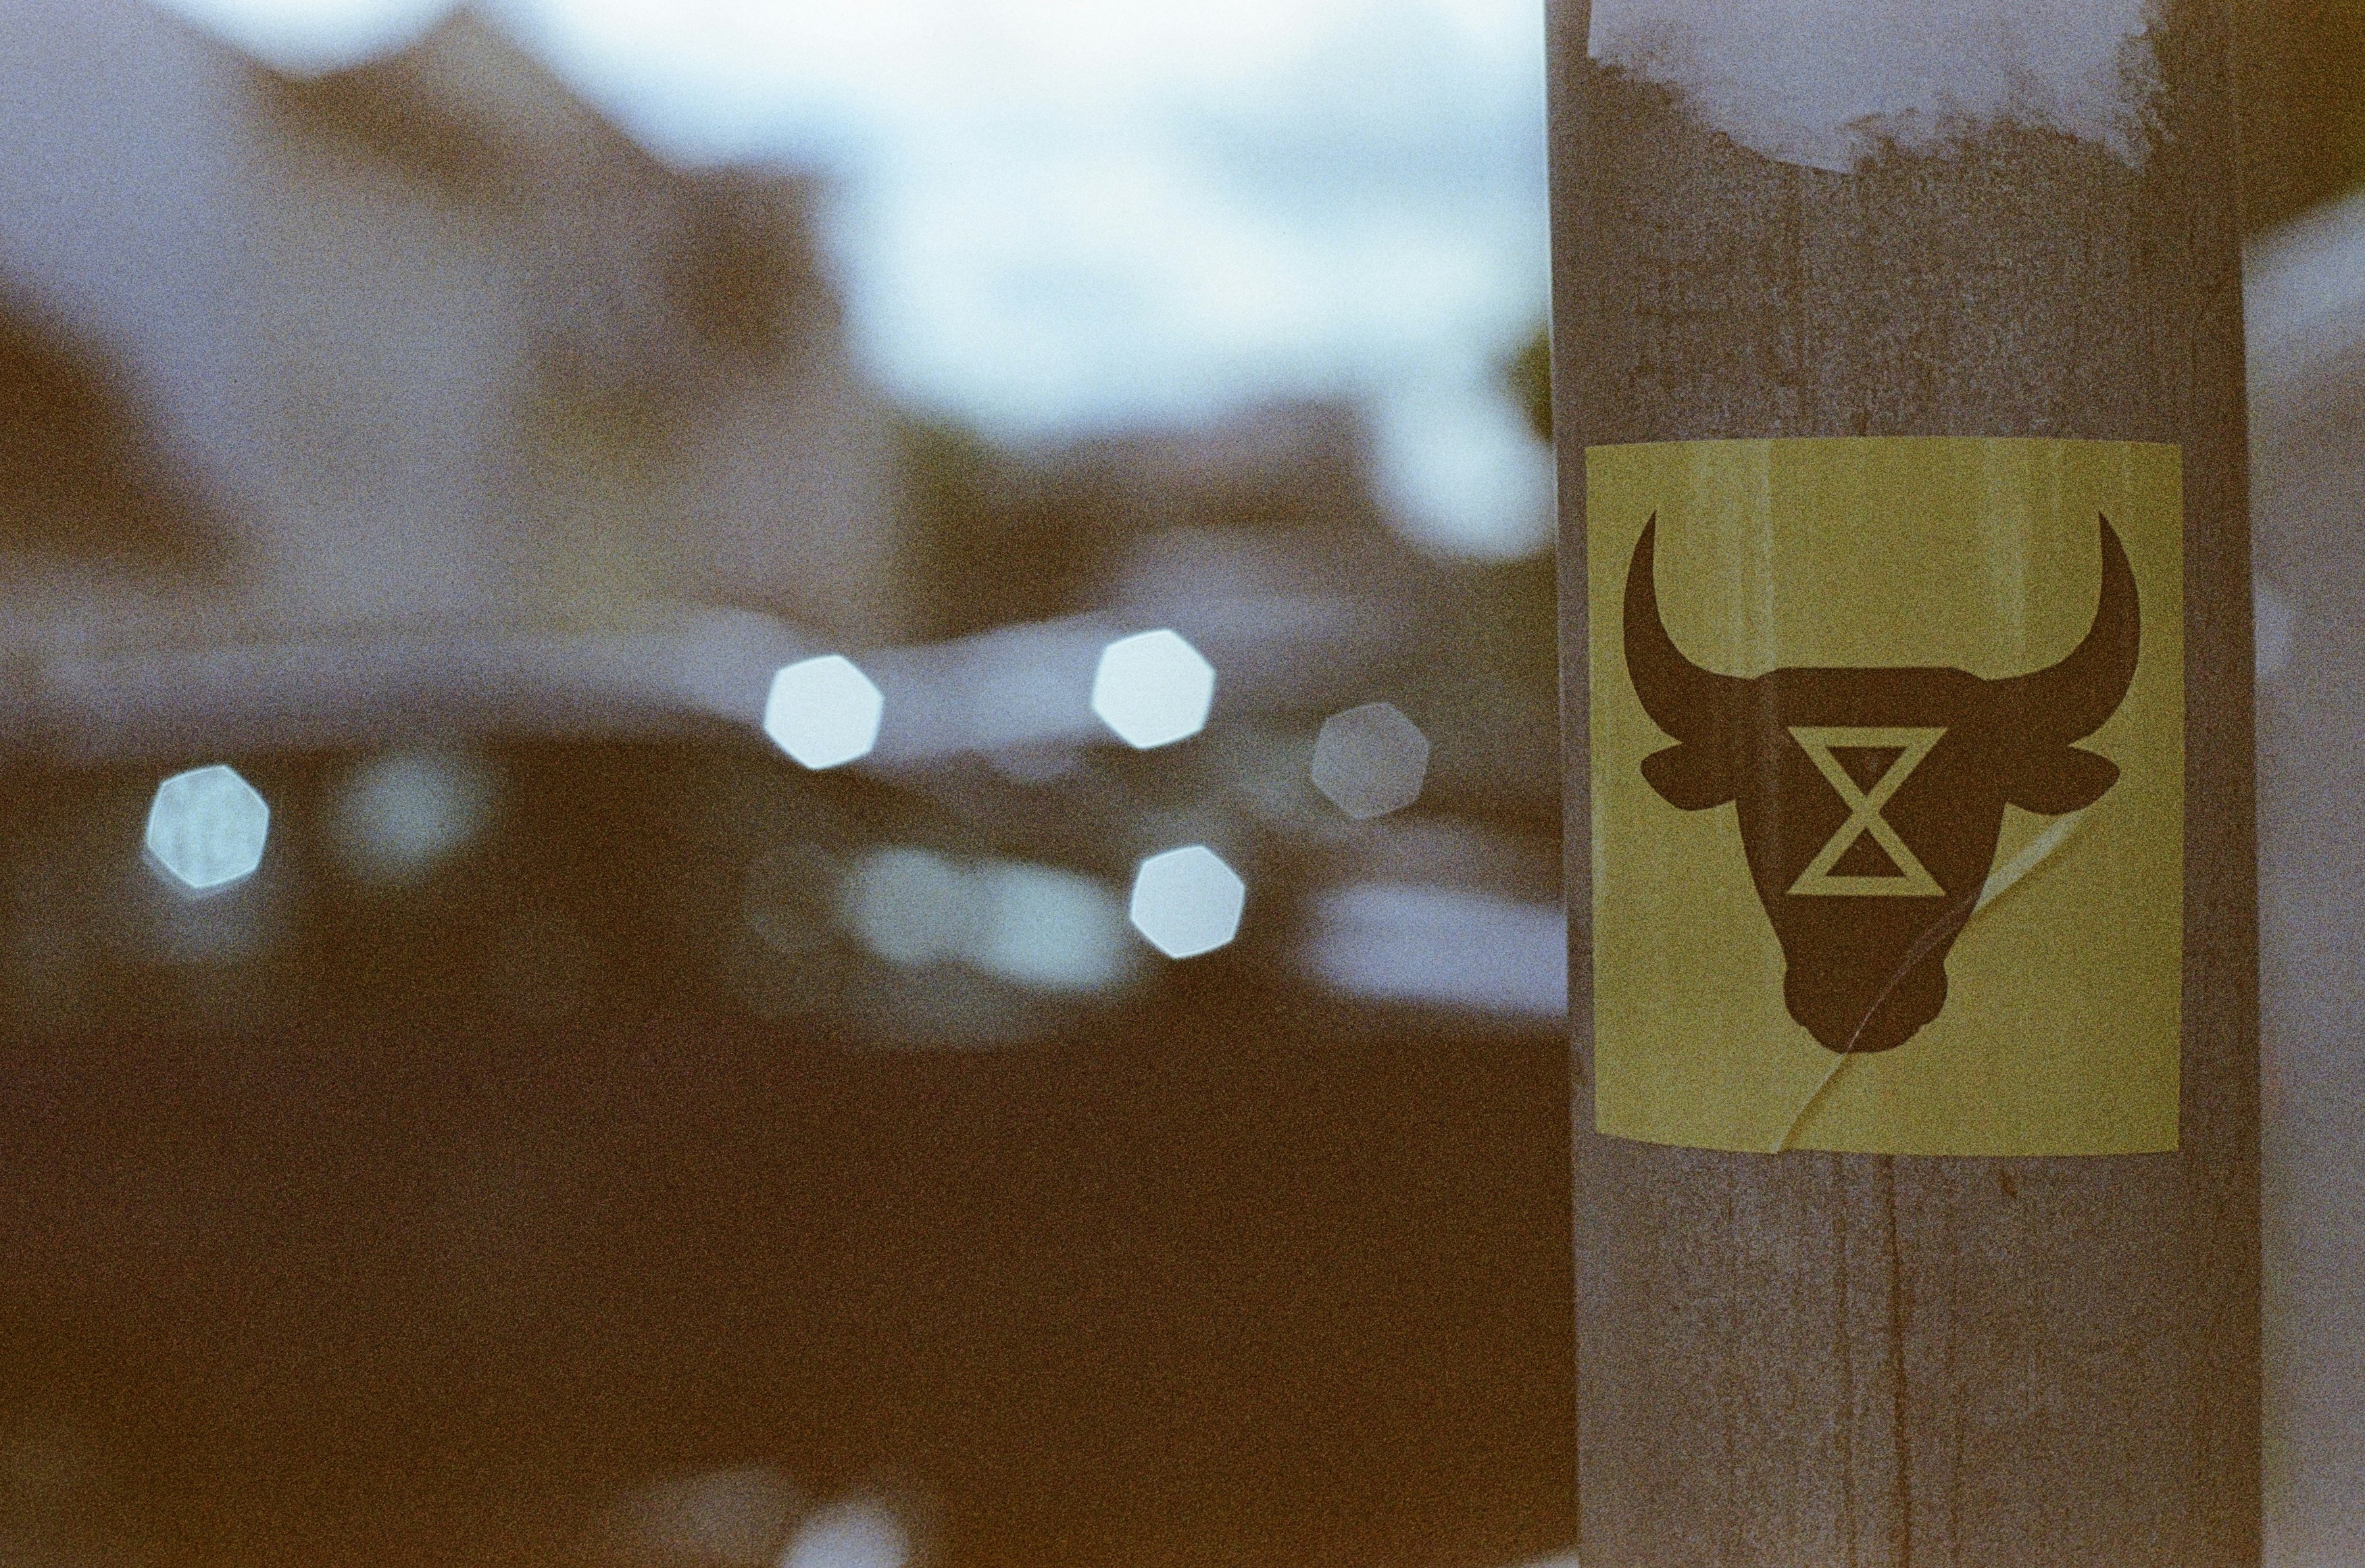 Extinction Rebellion - Protest sticker against animal suffering. Leica R7 (1994), Summilux-R 1.4 50mm (1983). Hi-Res analog scan by www.totallyinfocus.com - Kodak Gold 160 (expired 2001)